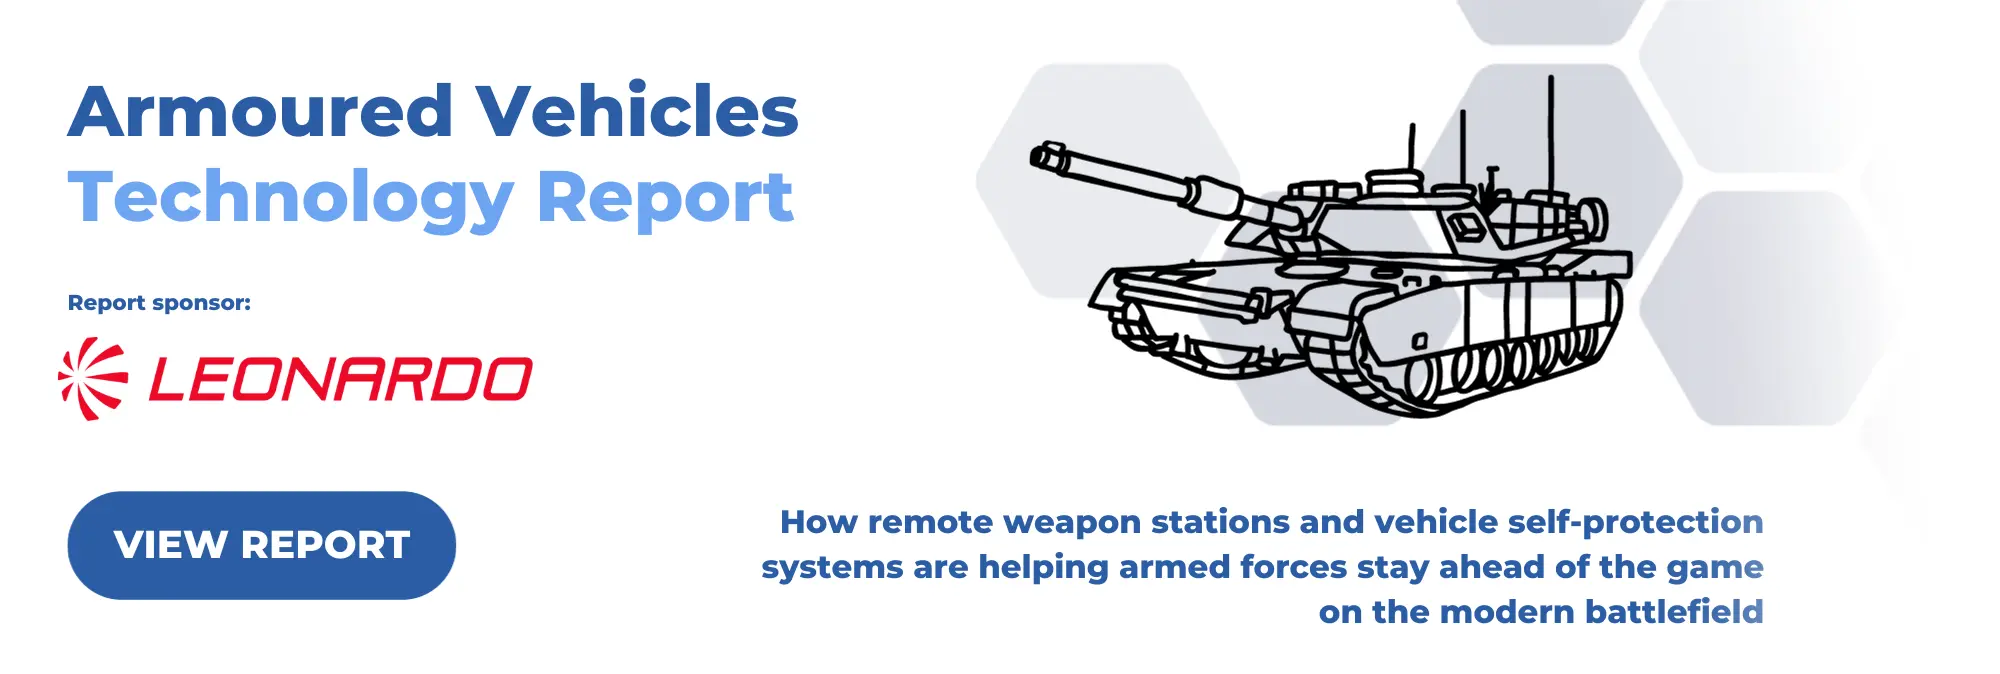 Armoured Vehicles Technology Report